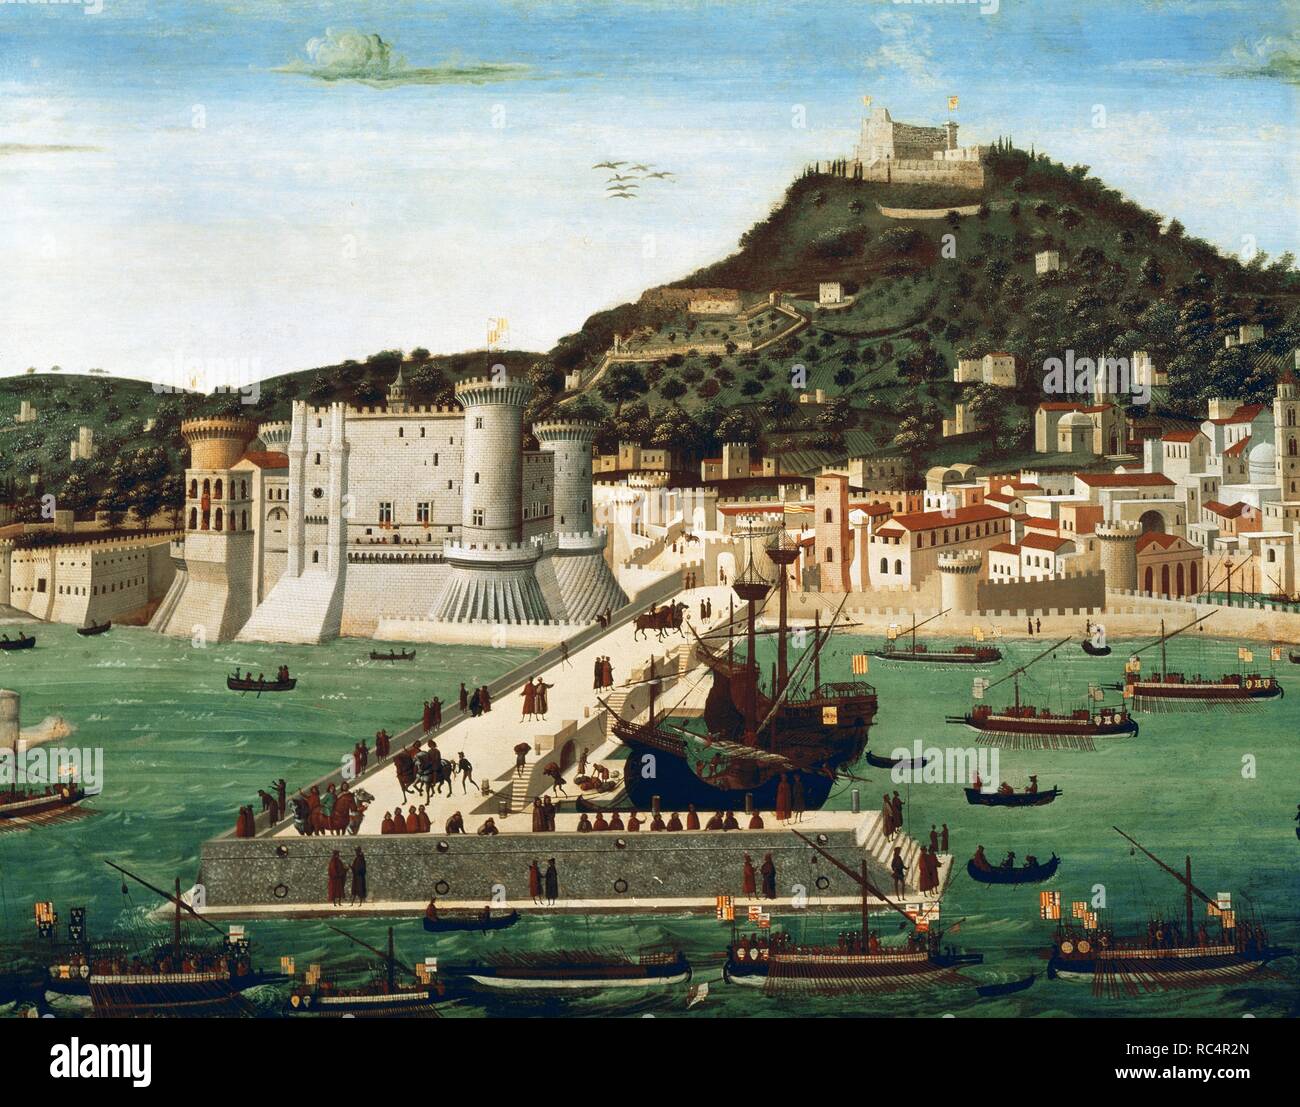 La Tavola Strozzi. View of Naples from 15th century. City and trading port. Attributed by Francesco Rosselli, 1472. Aragon Crown domination. Stock Photo